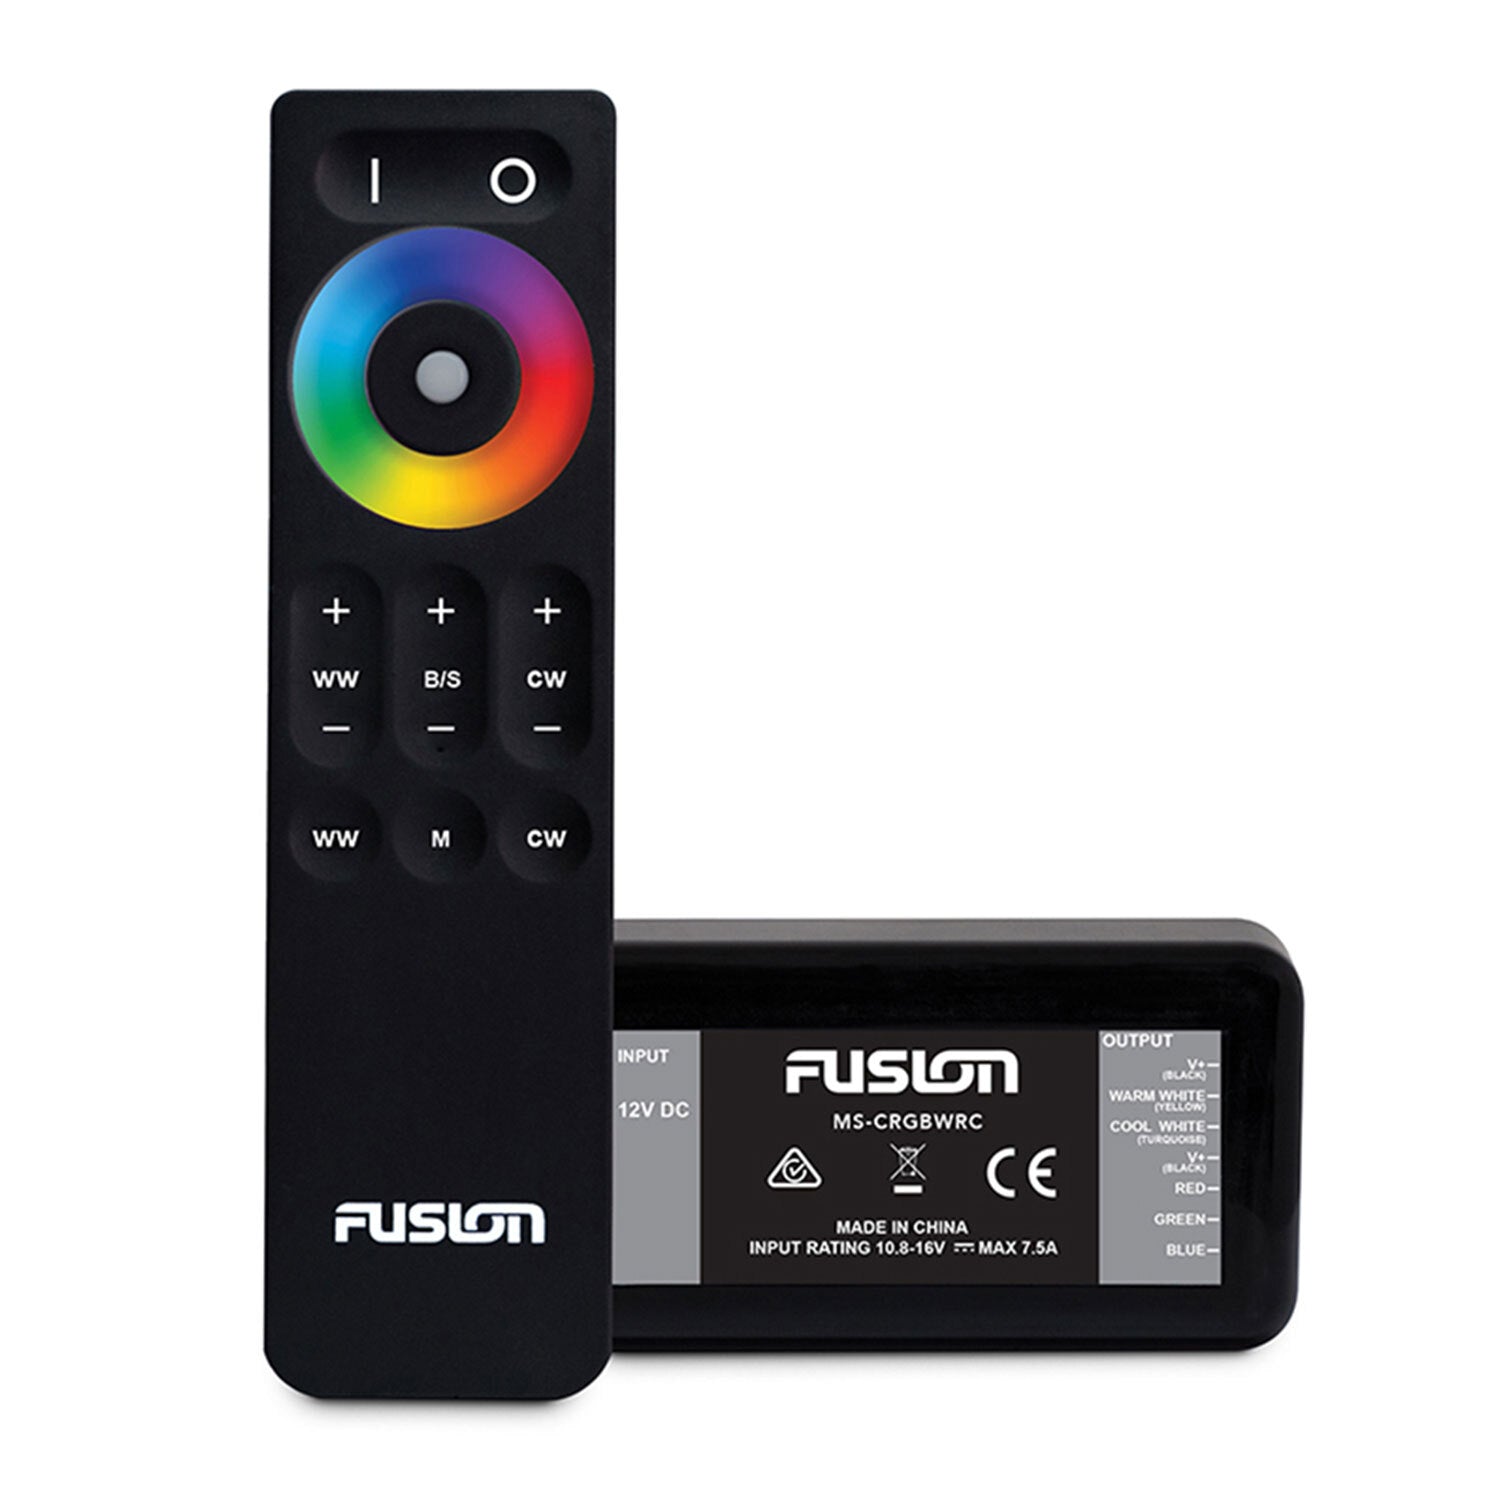 Wireless Remote Control for RGB Lighting